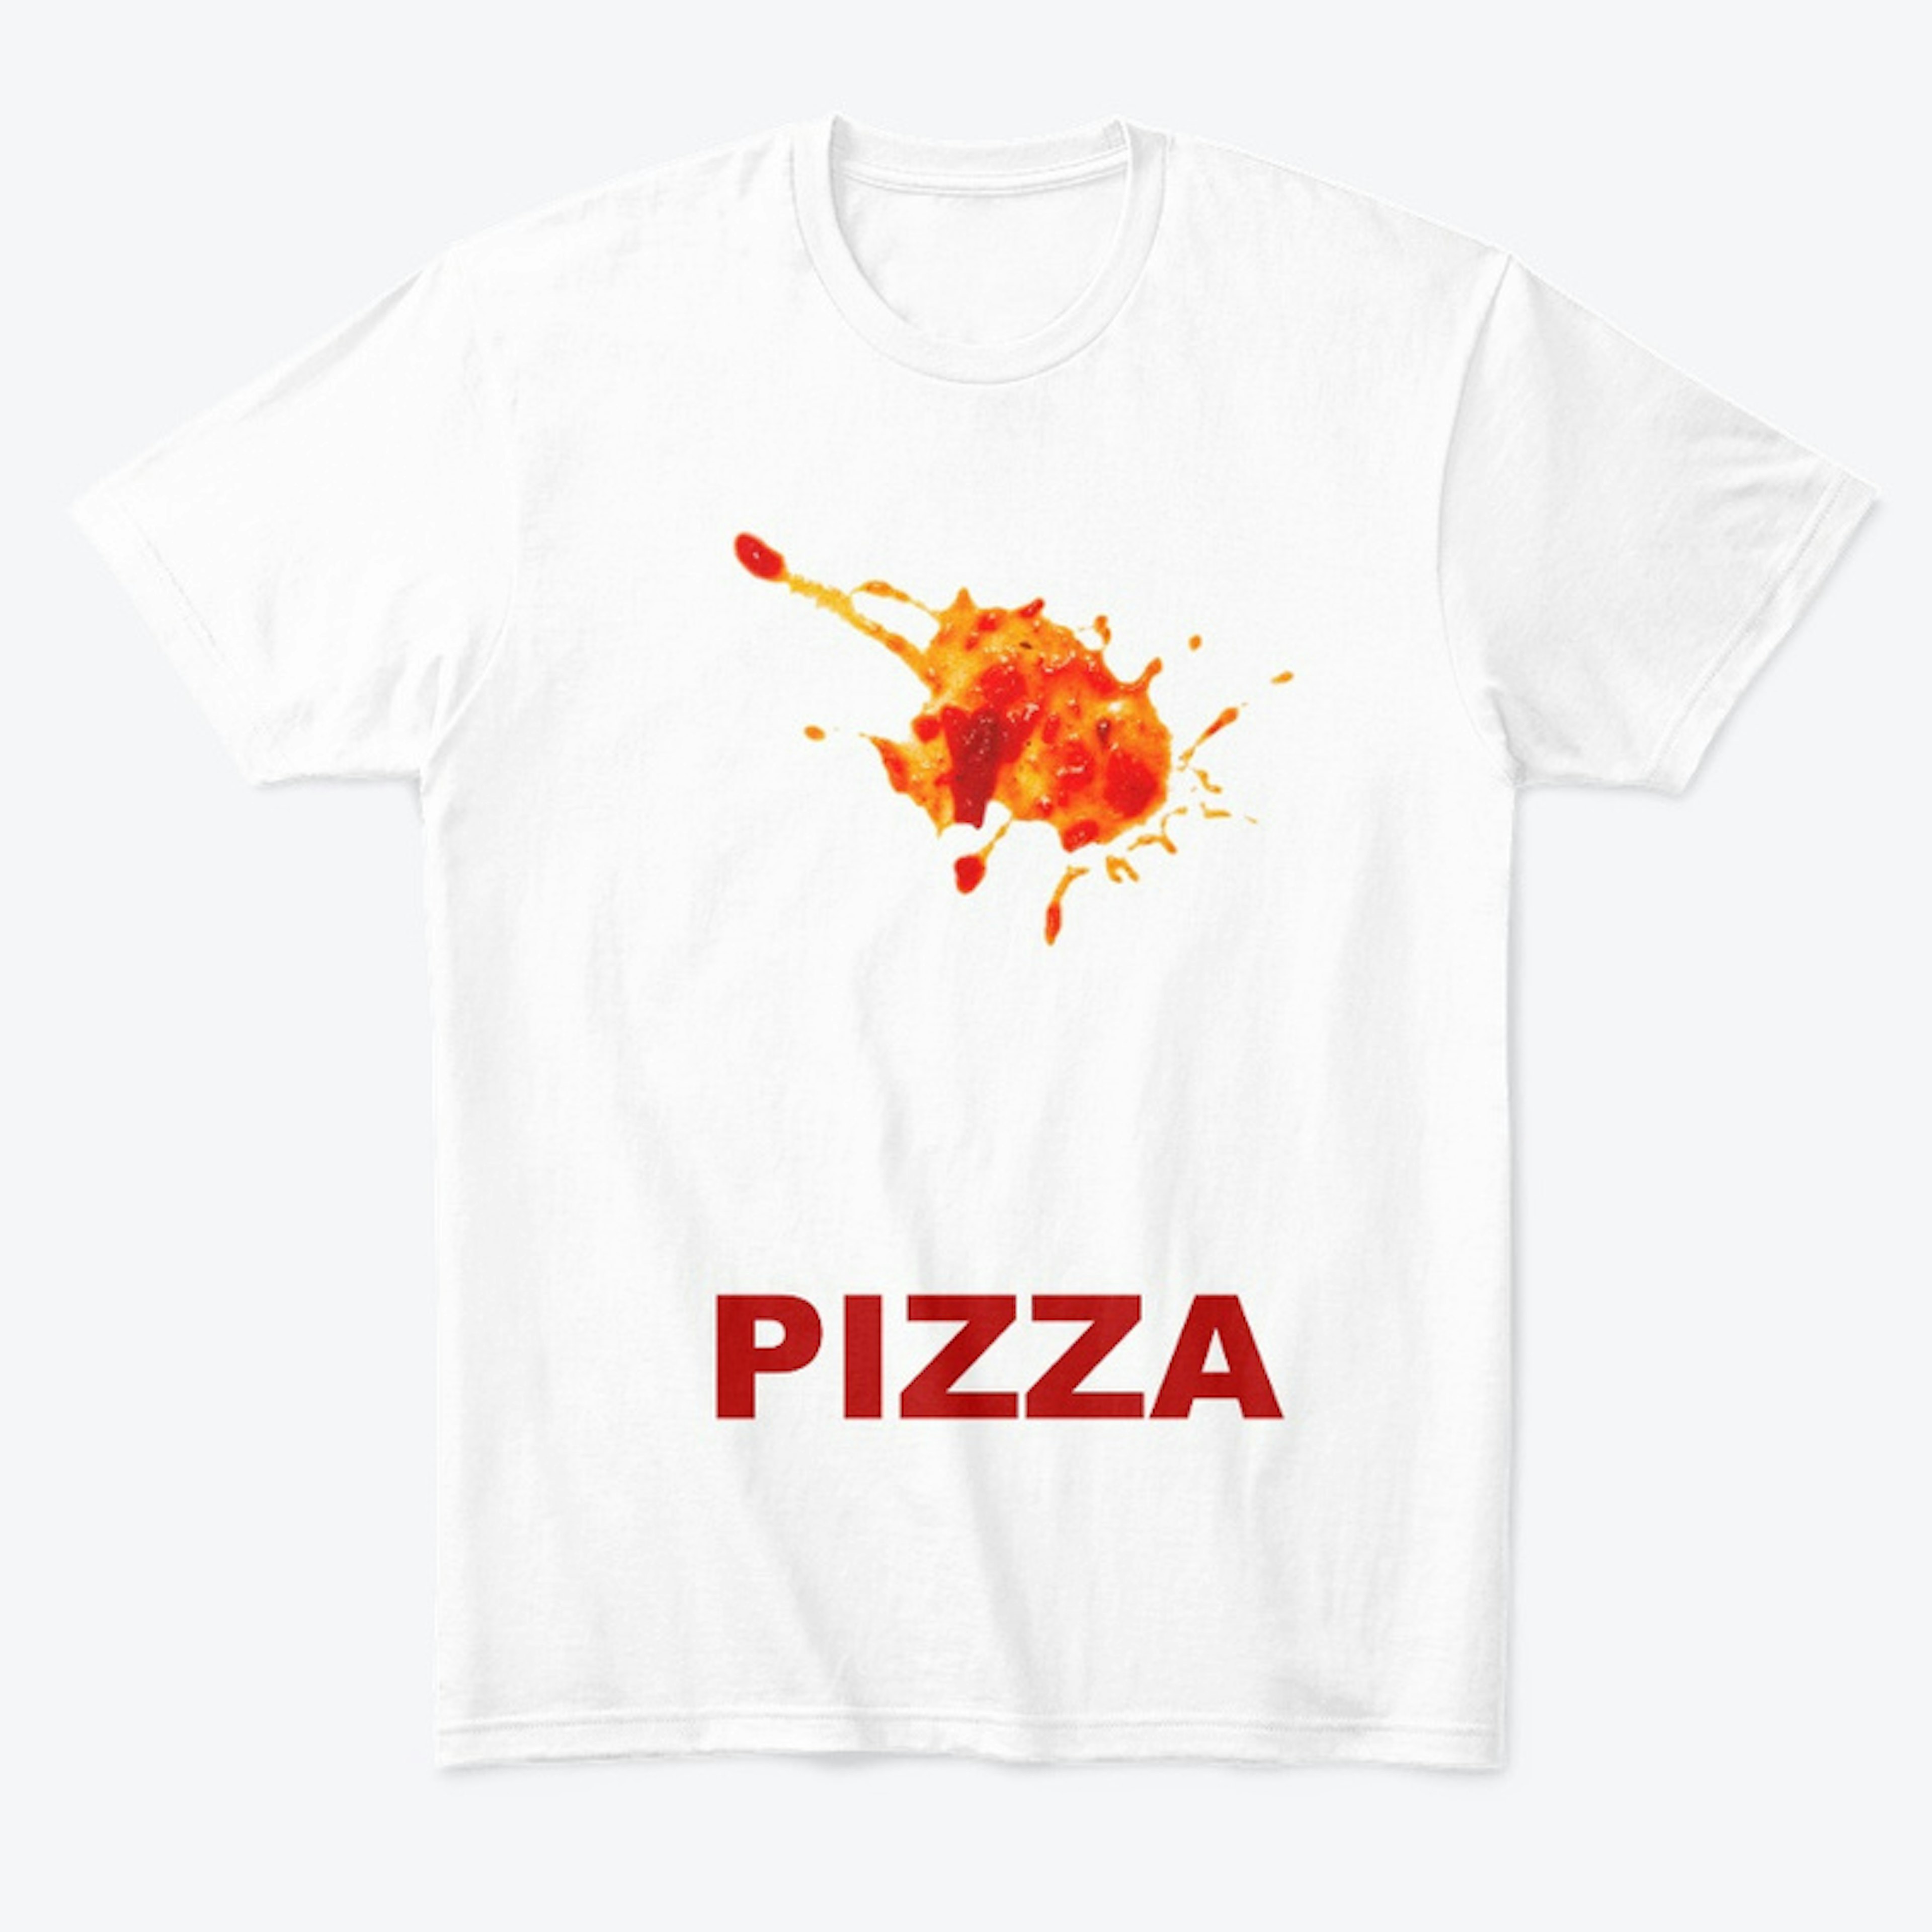 PIZZA STAIN